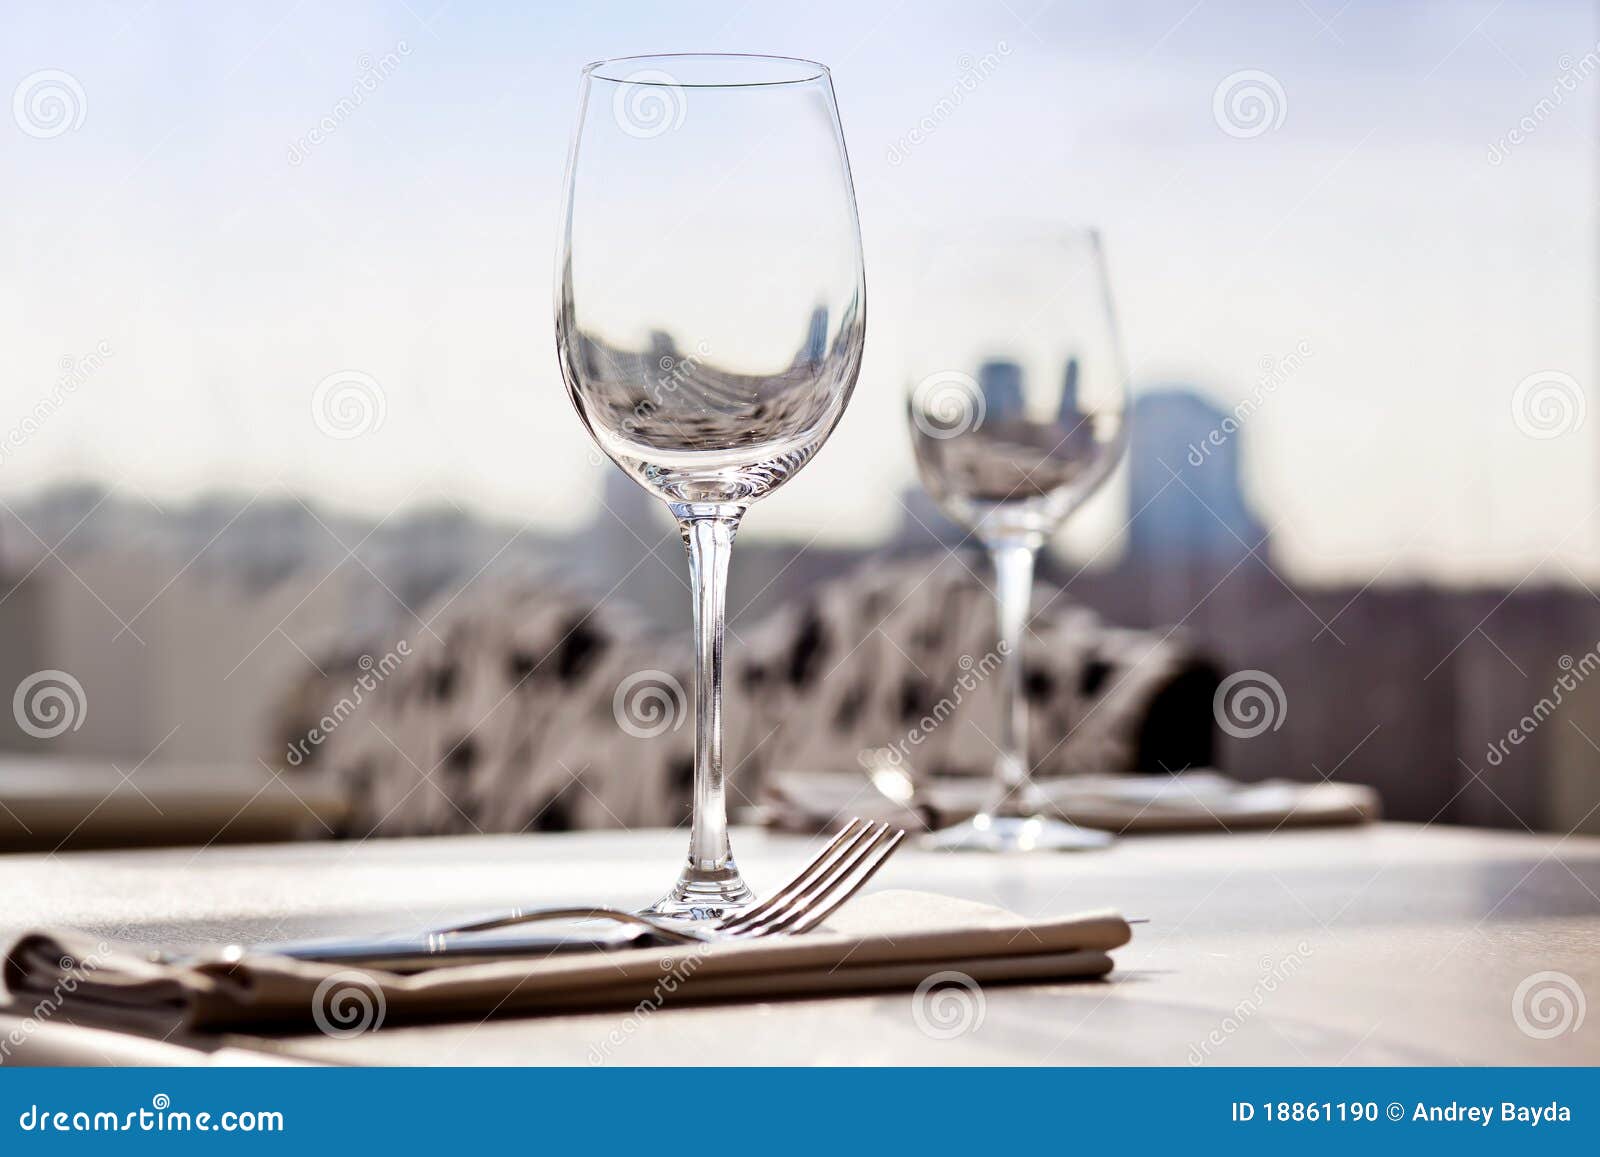 Fine Restaurant Dinner Table Place Setting Stock Photo - Image of empty